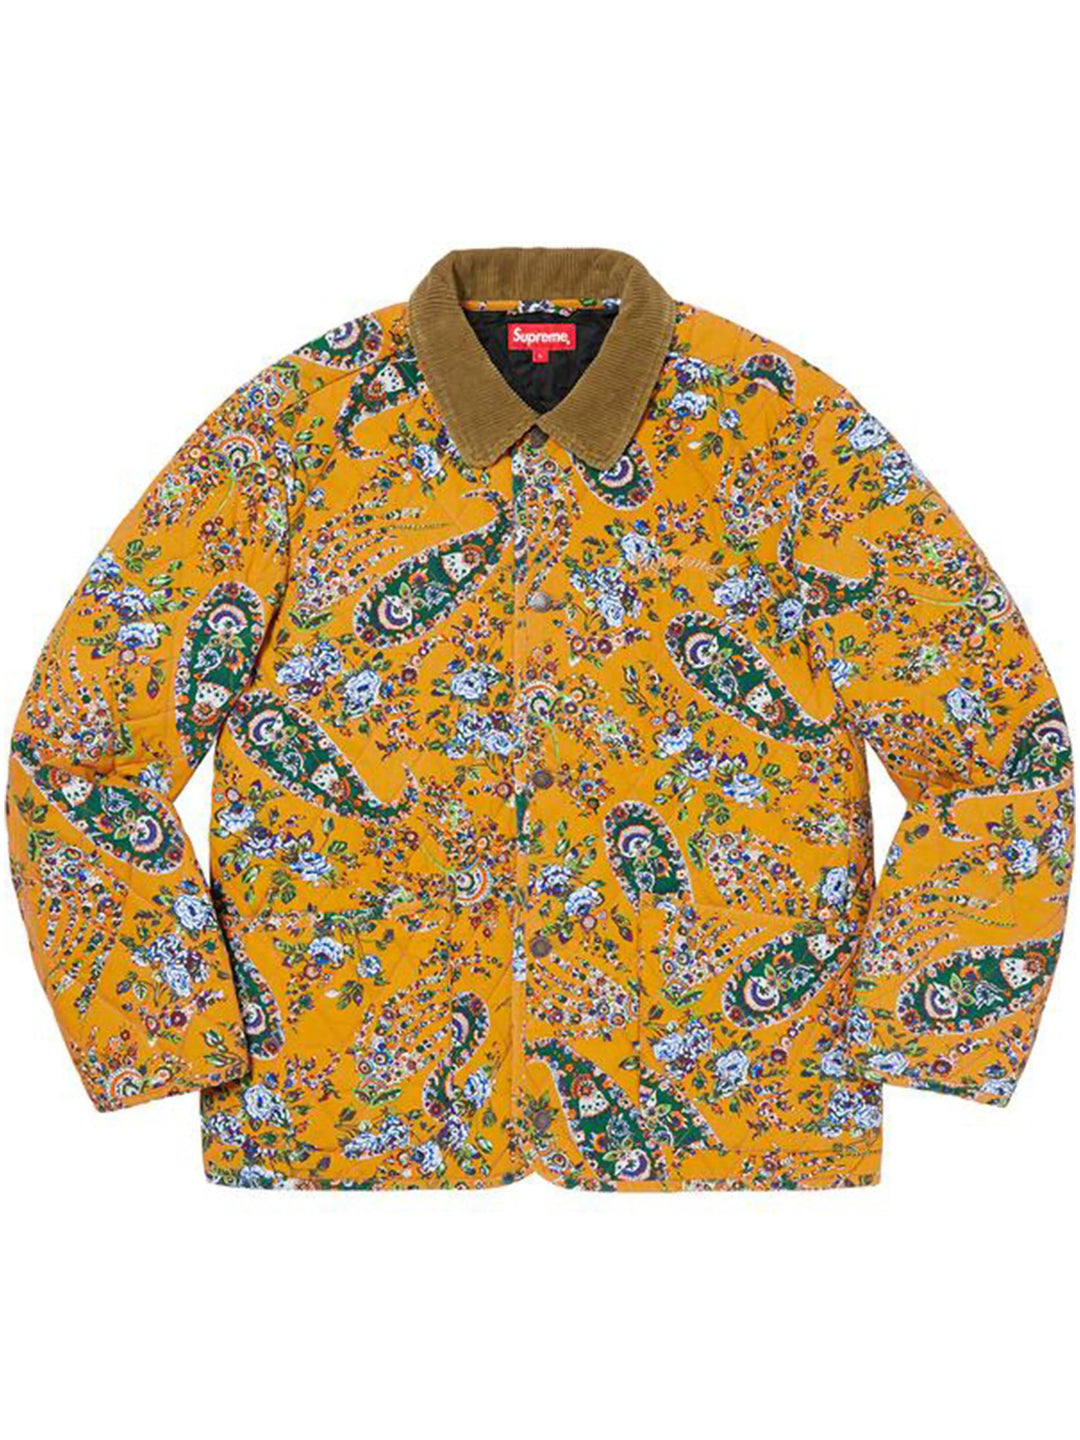 Supreme Paisley Quilted Jacket Mustard [FW19] Prior